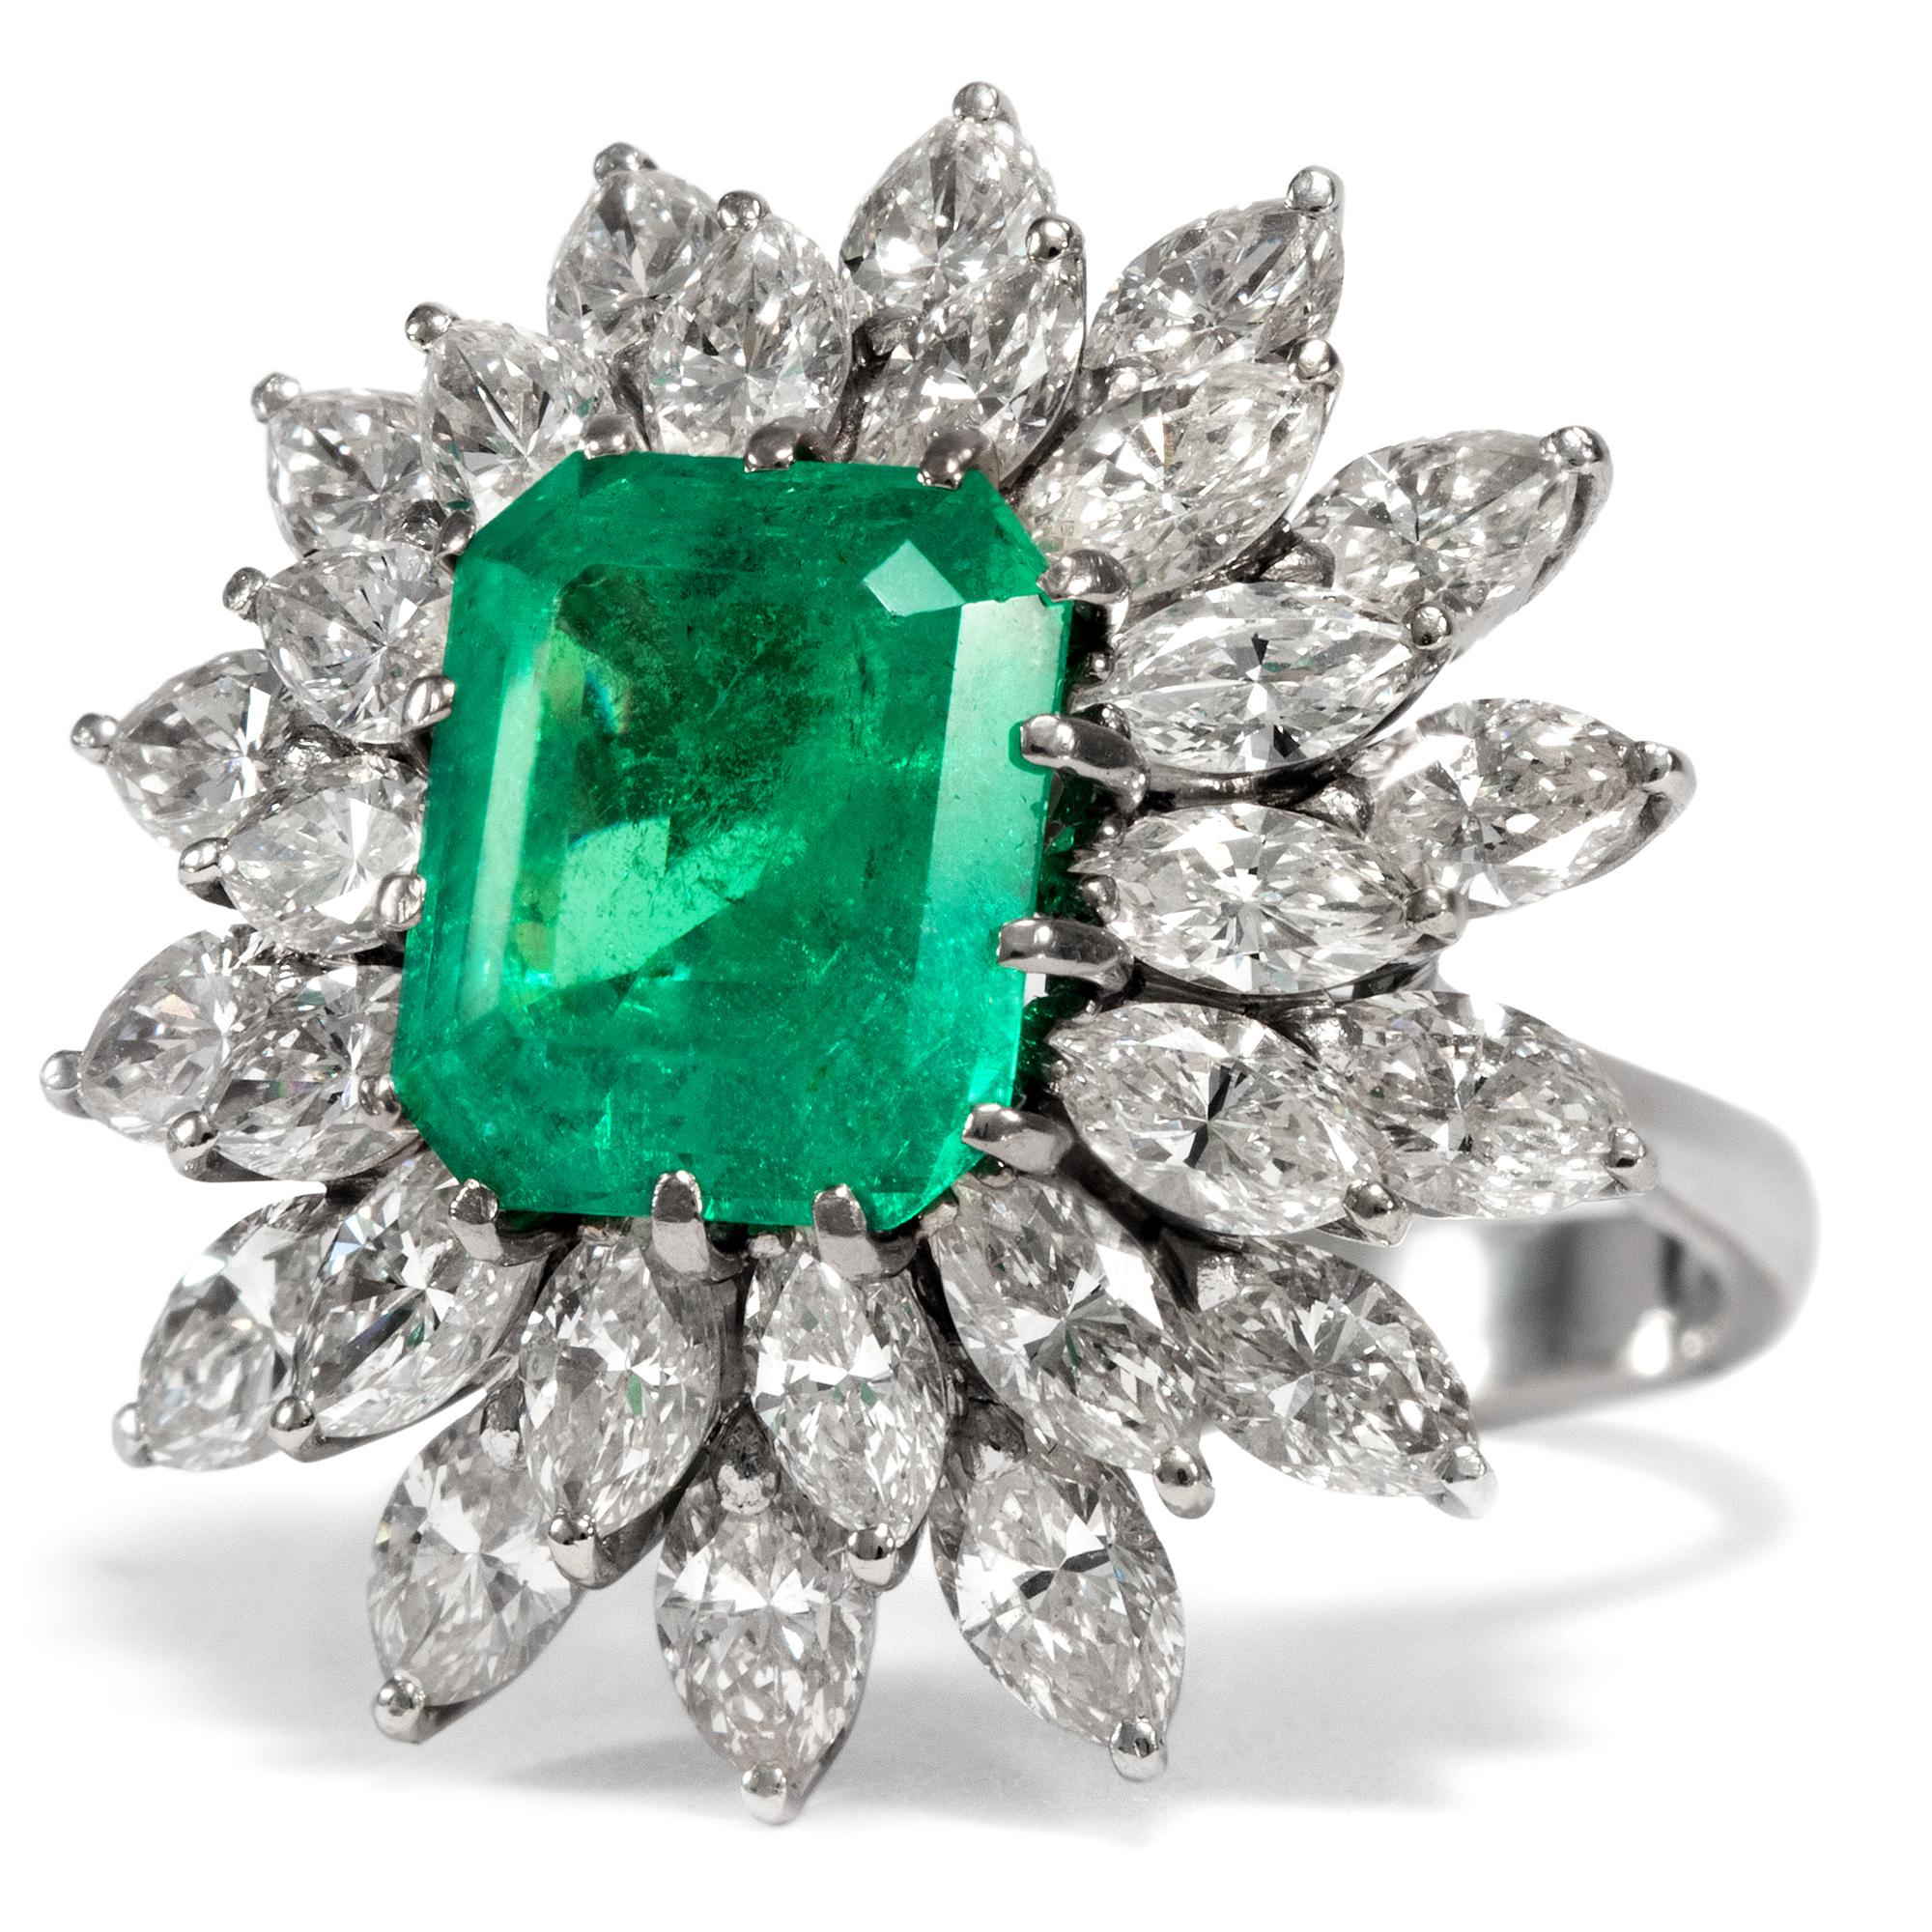 Retro Vintage circa 1970 Certified 3.62 Carat Emerald and 4.48 Ct Diamond Cluster Ring